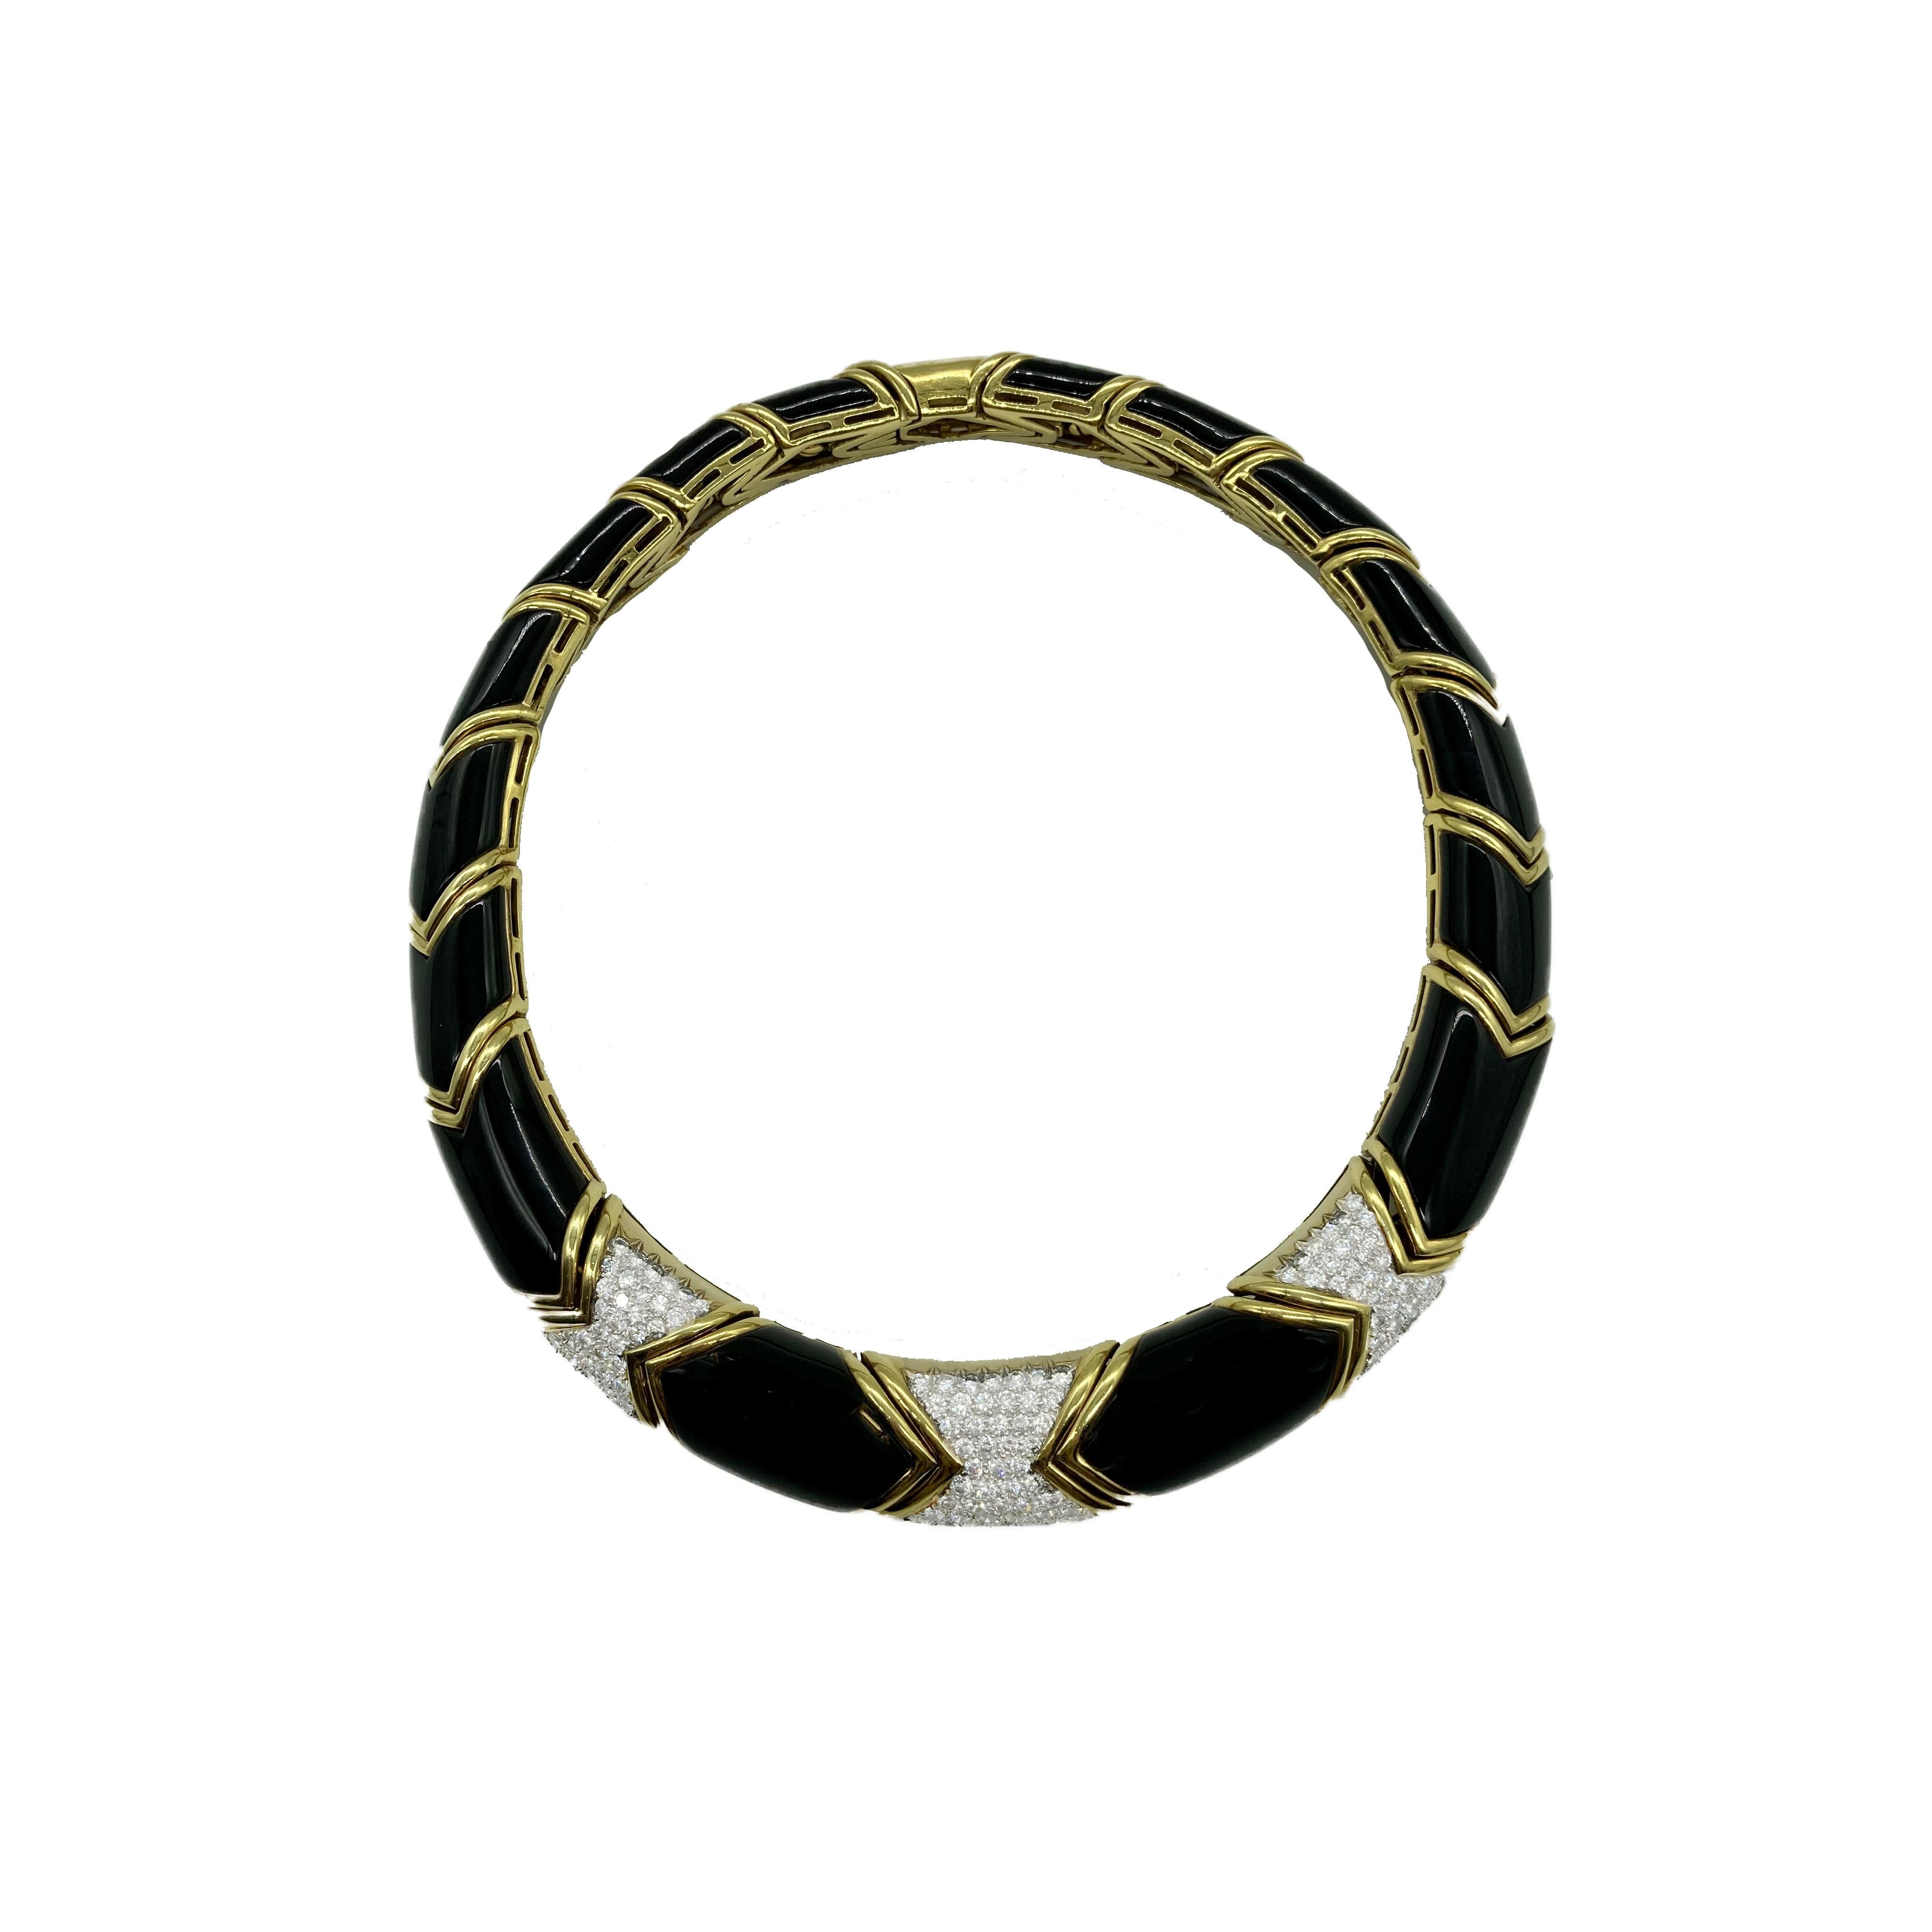 A chic black onyx and diamond necklace in yellow gold, circa 1980s.